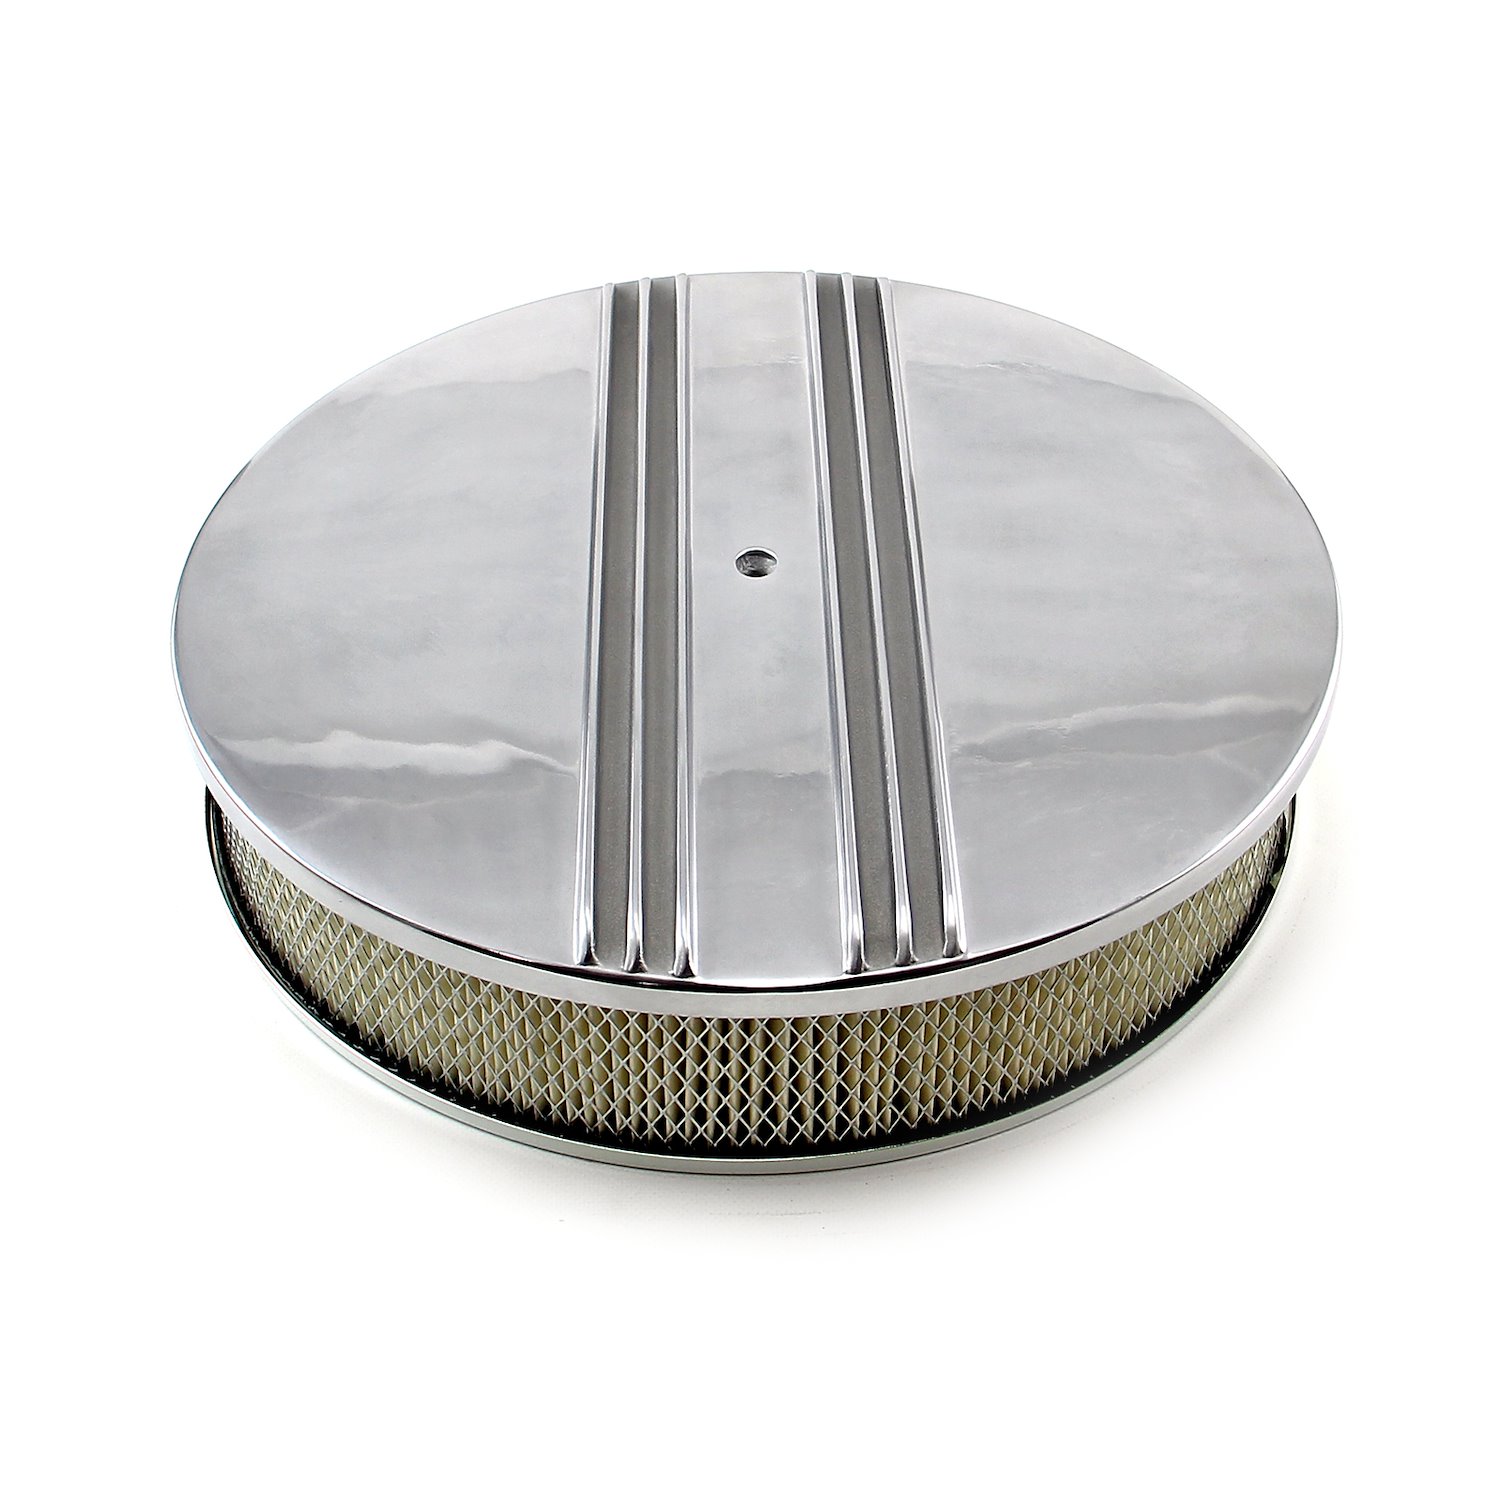 14 Classic Finned Polished Aluminum Air Cleaner Kit